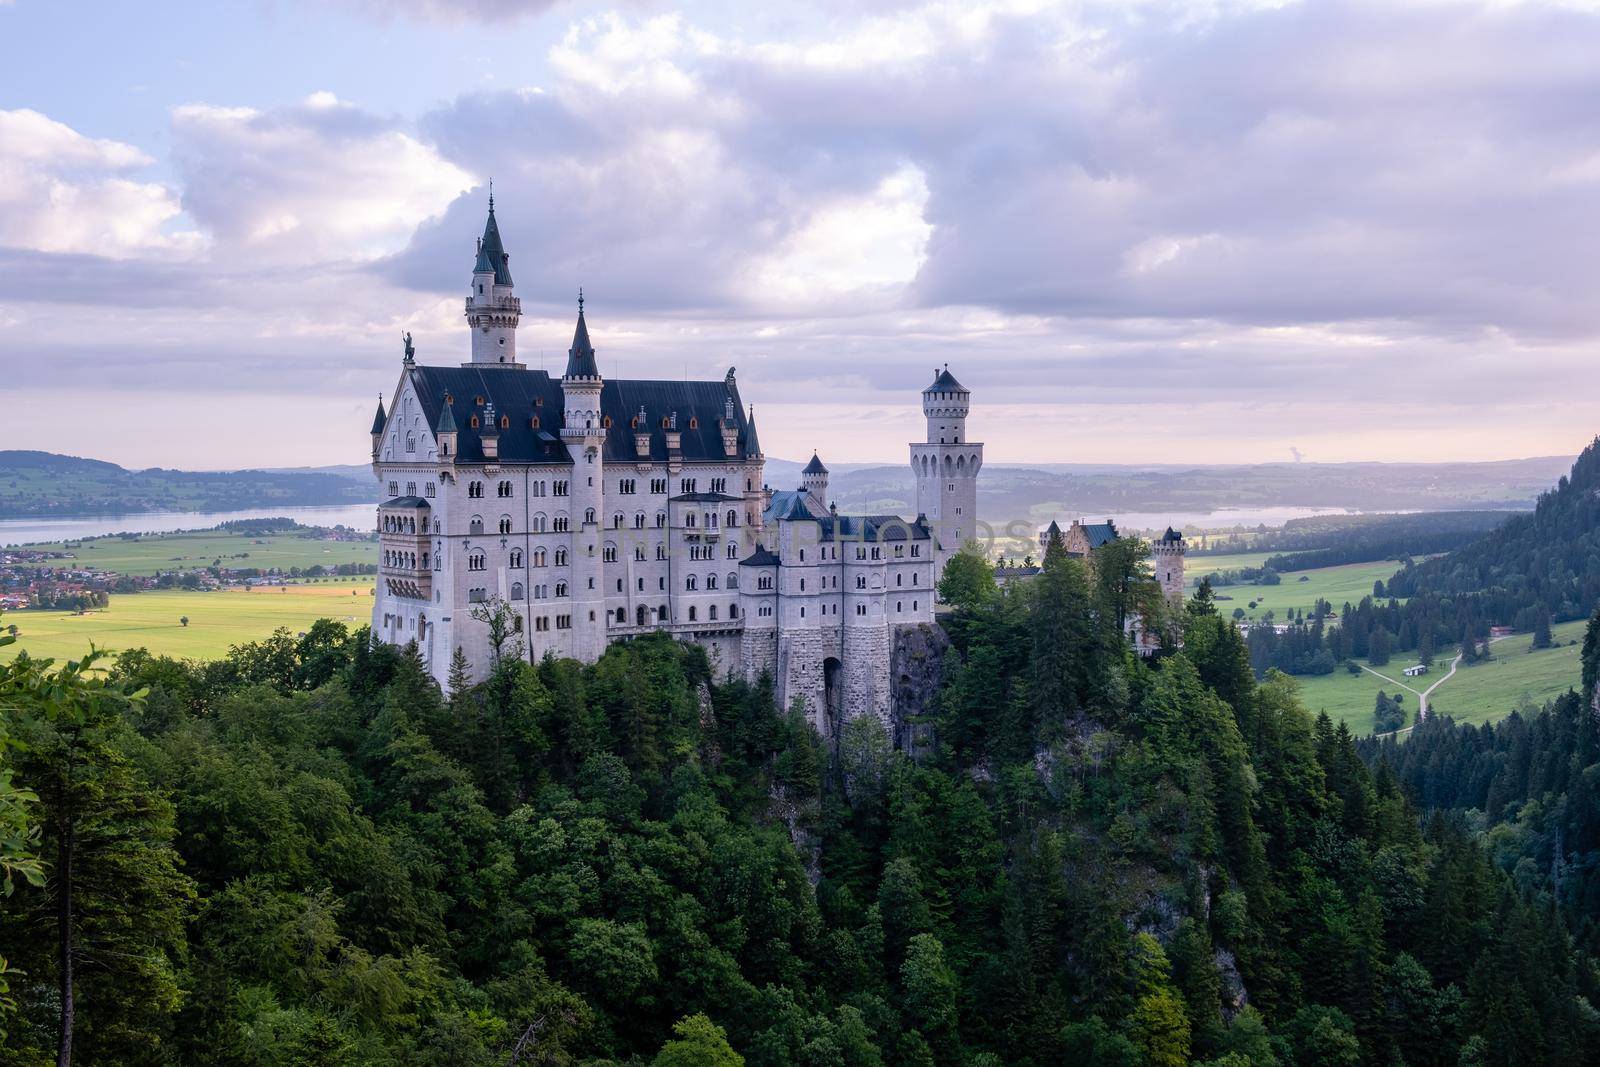 Beautiful view of world-famous Neuschwanstein Castle, the nineteenth-century Romanesque Revival palace built for King Ludwig II on a rugged cliff near Fussen, southwest Bavaria, Germany by fokkebok